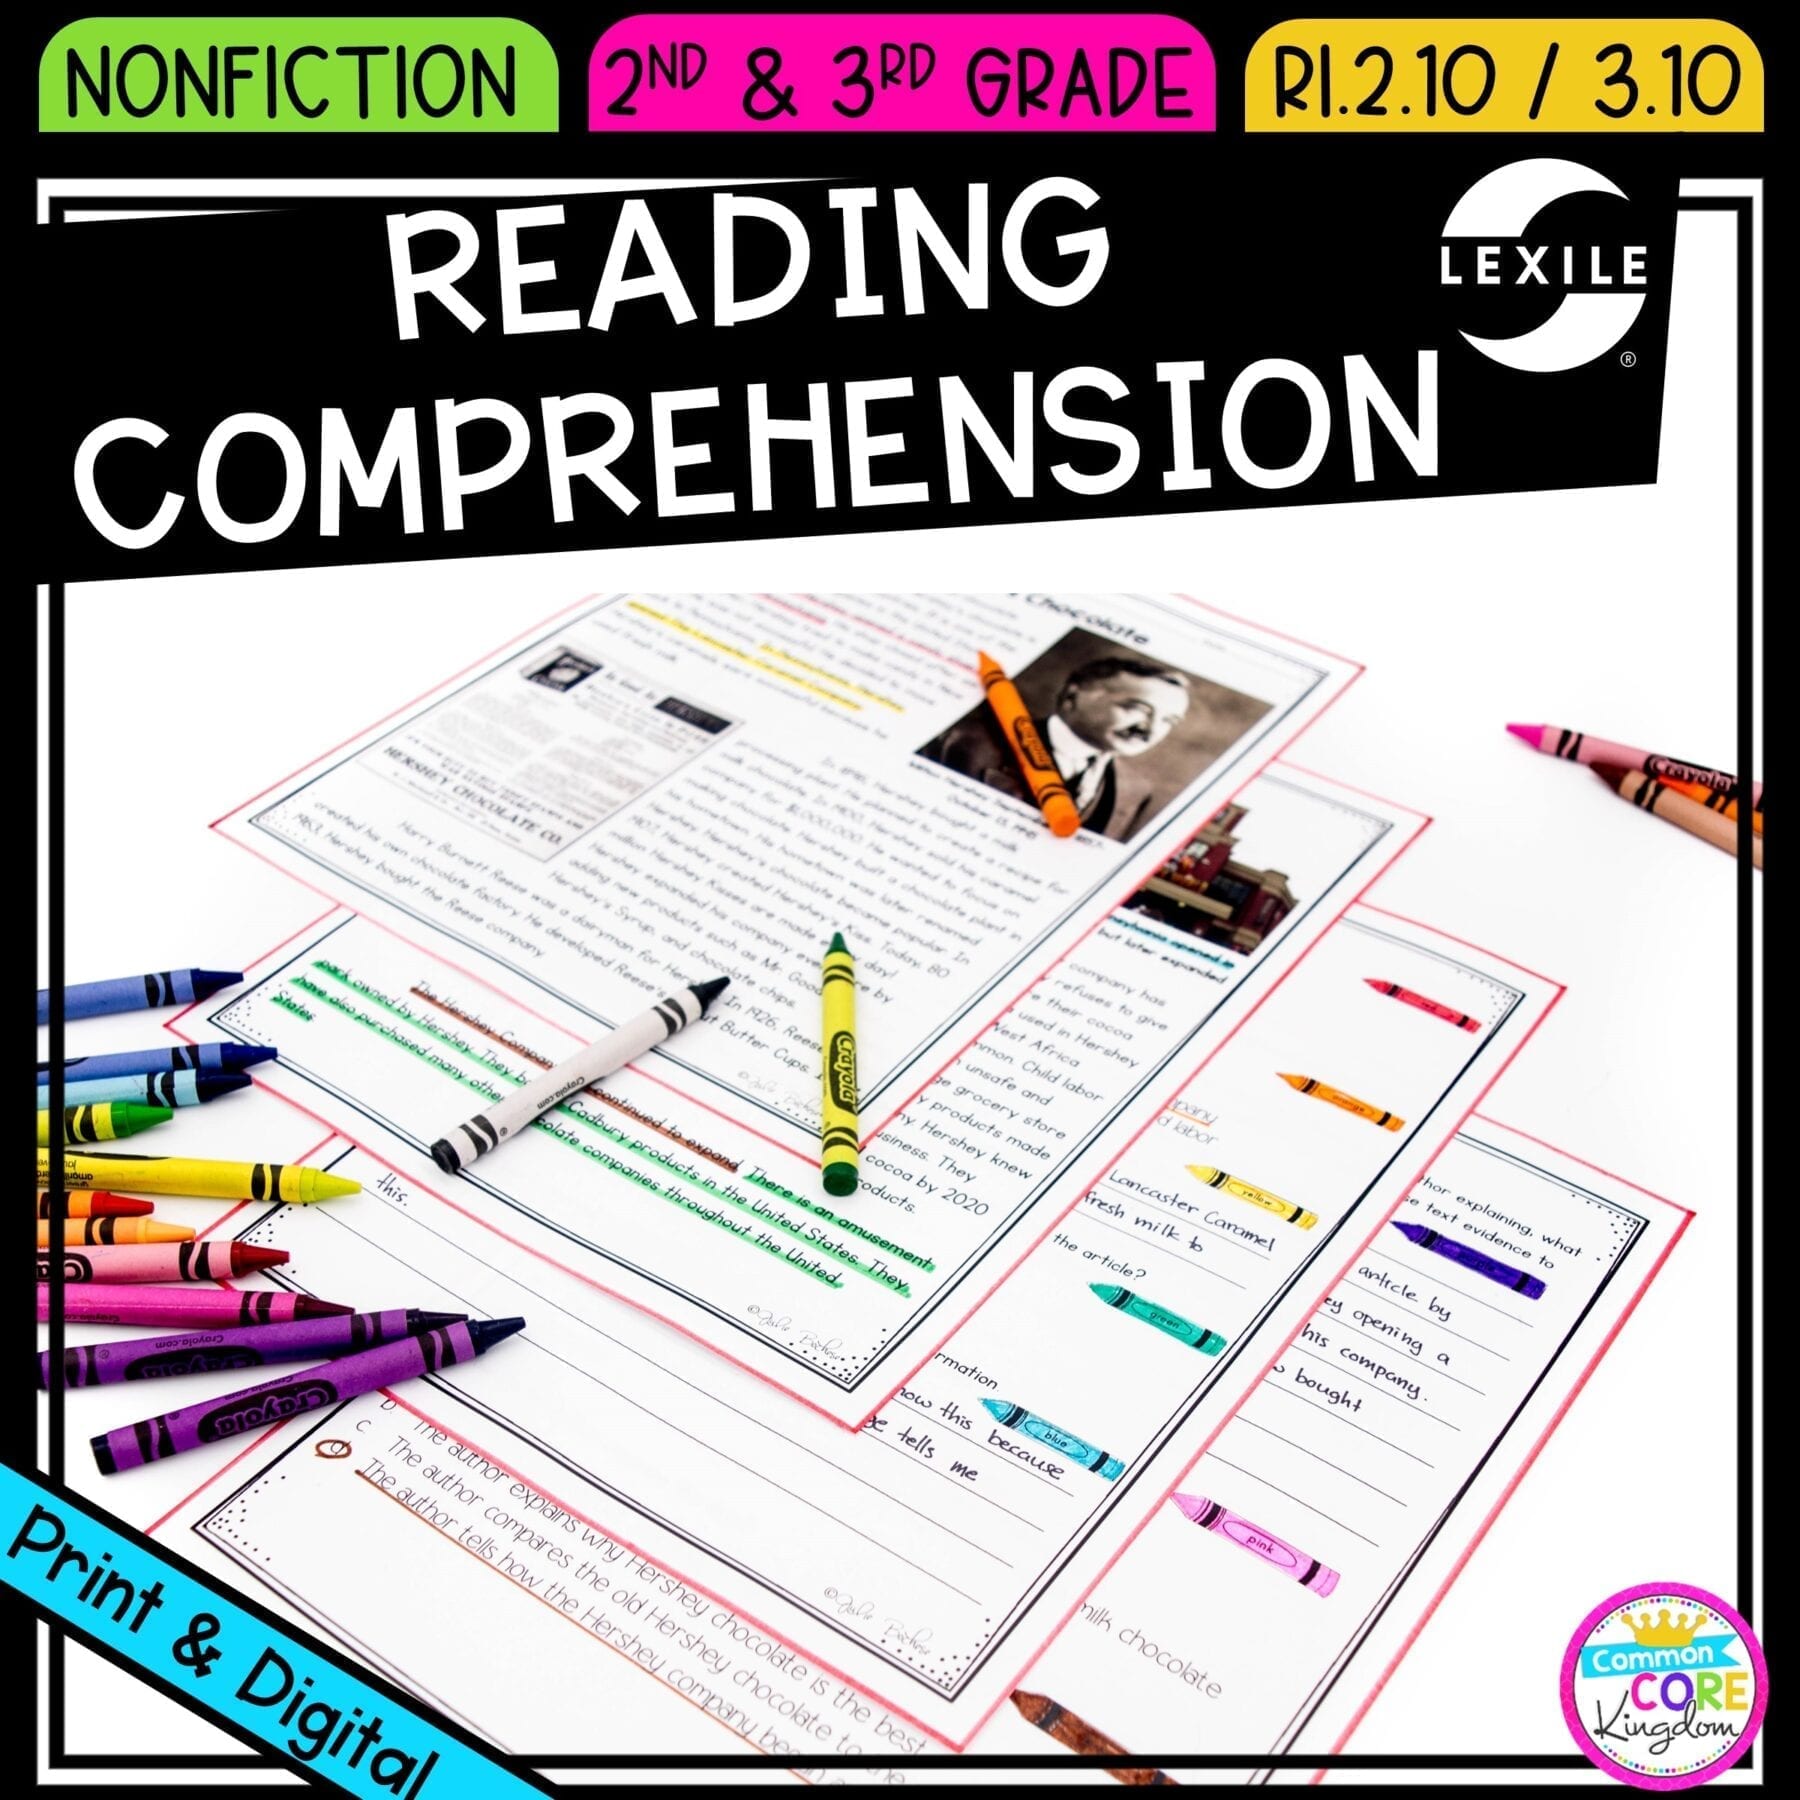 Comprehending Informational & Nonfiction Text for 2nd and 3rd grade cover showing printable and digital worksheets